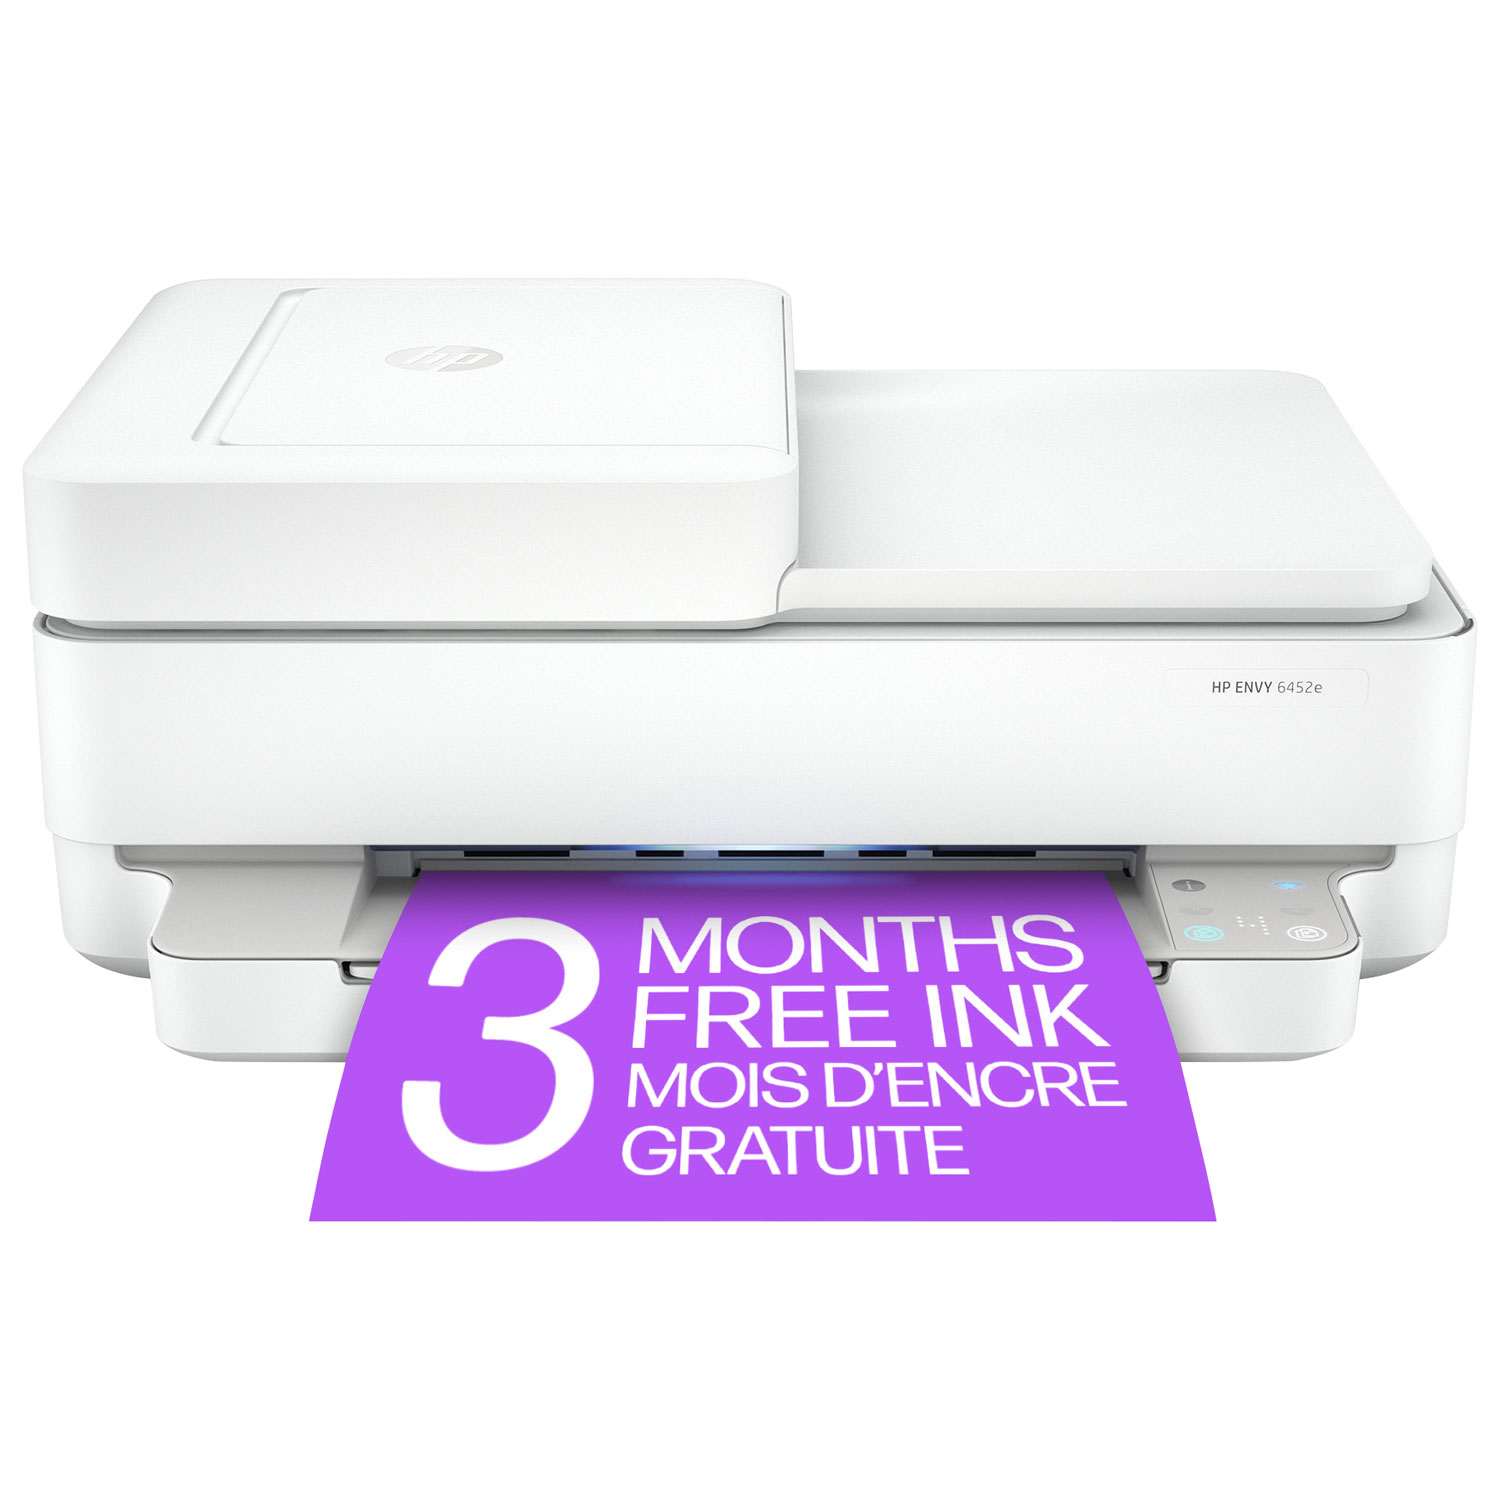 HP ENVY 6452e Wireless All-In-One Inkjet Printer - HP Instant Ink 3-Month Free Trial Included*